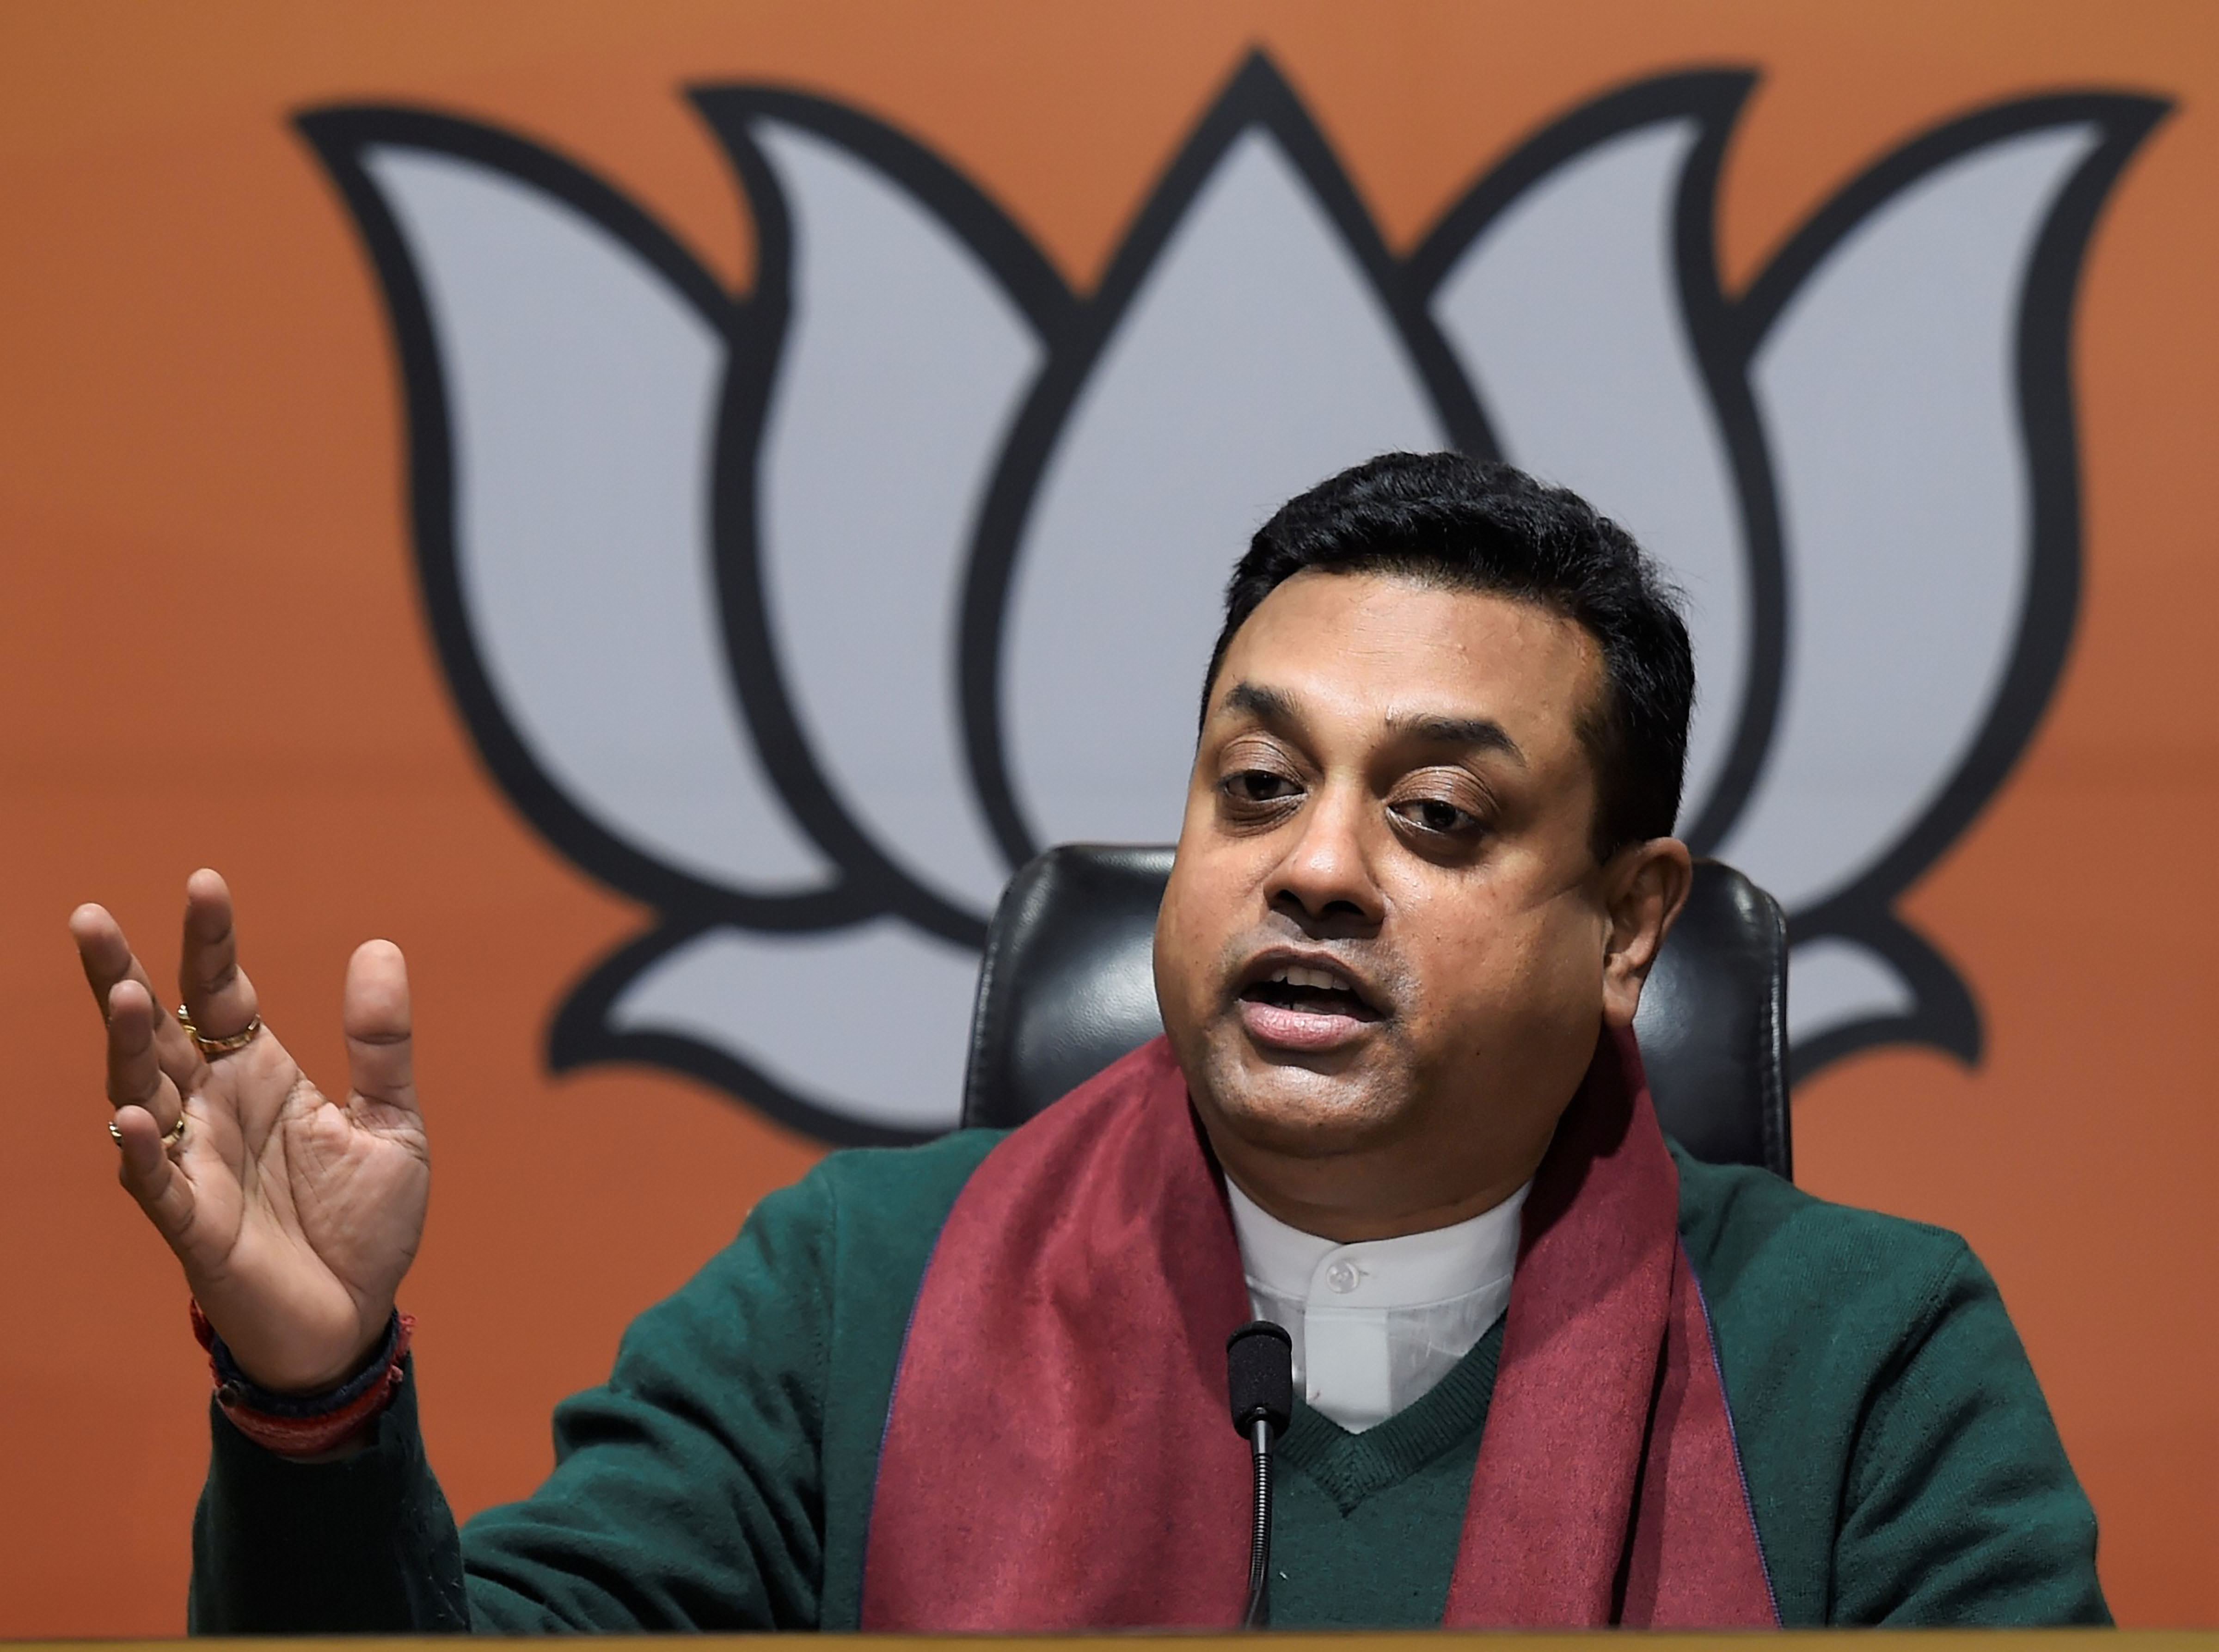 Agnipath protests: BJP accuses Congress of playing politics, using youth for vested interests